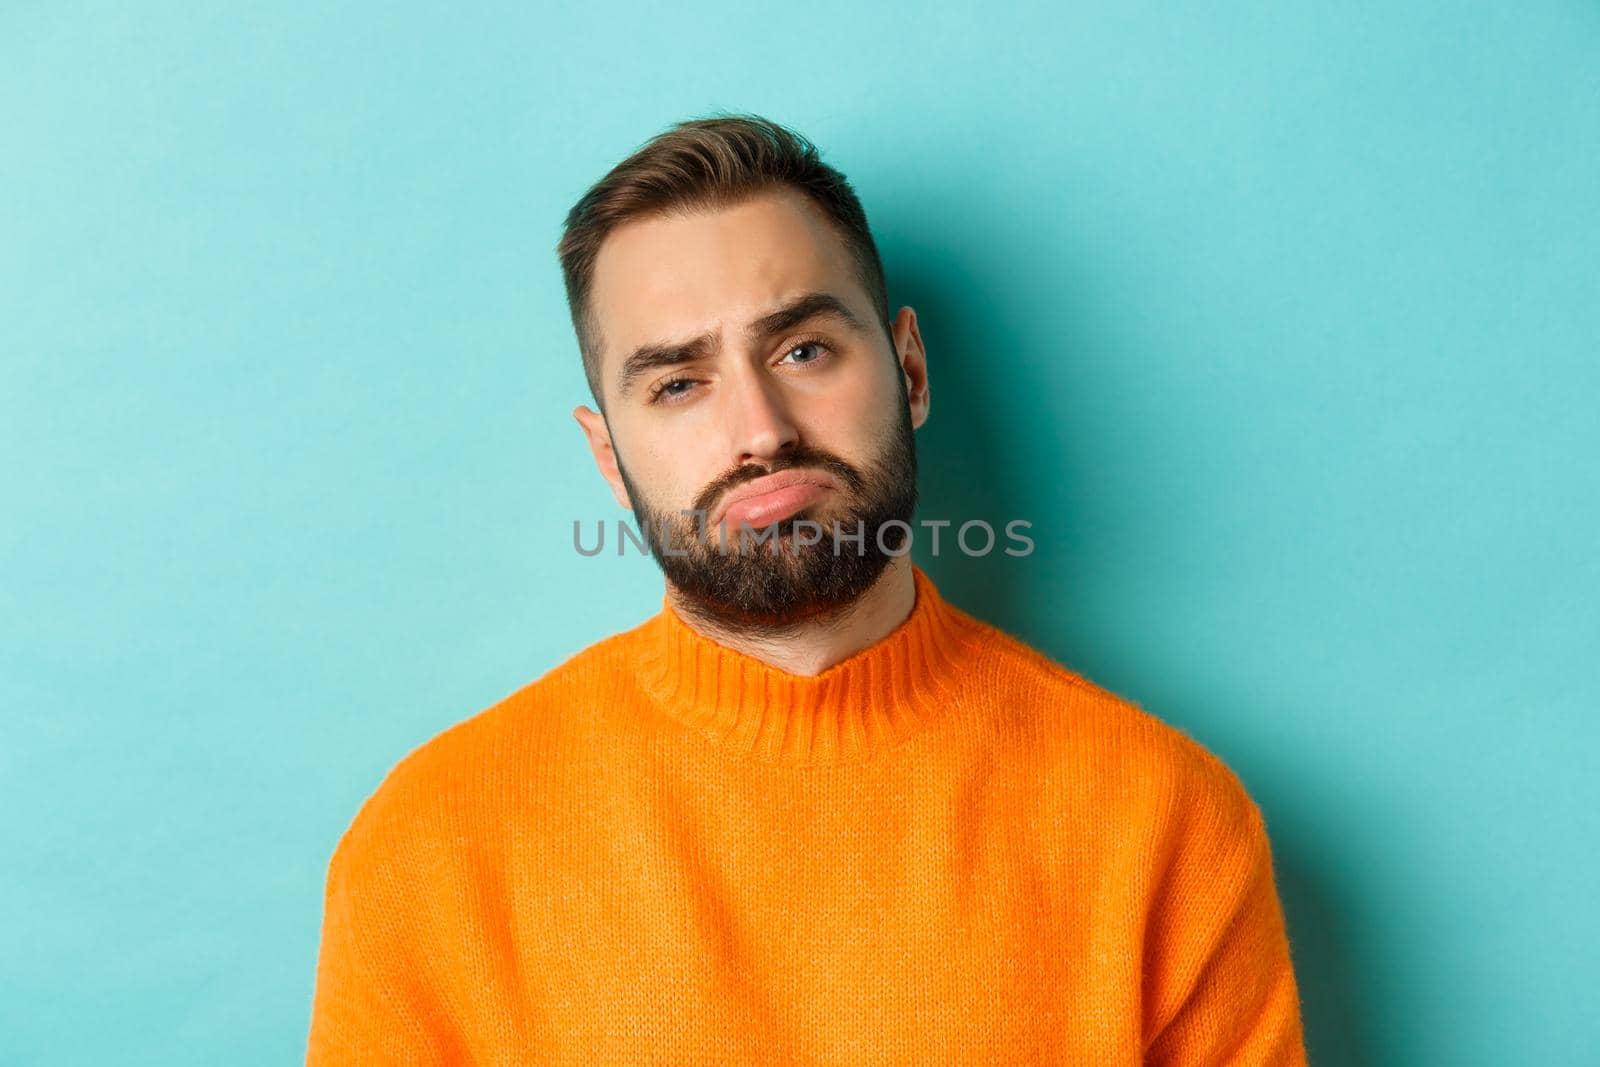 Close-up of upset young man sulking, looking disappointed and distressed, standing in orange sweater against turquoise background.